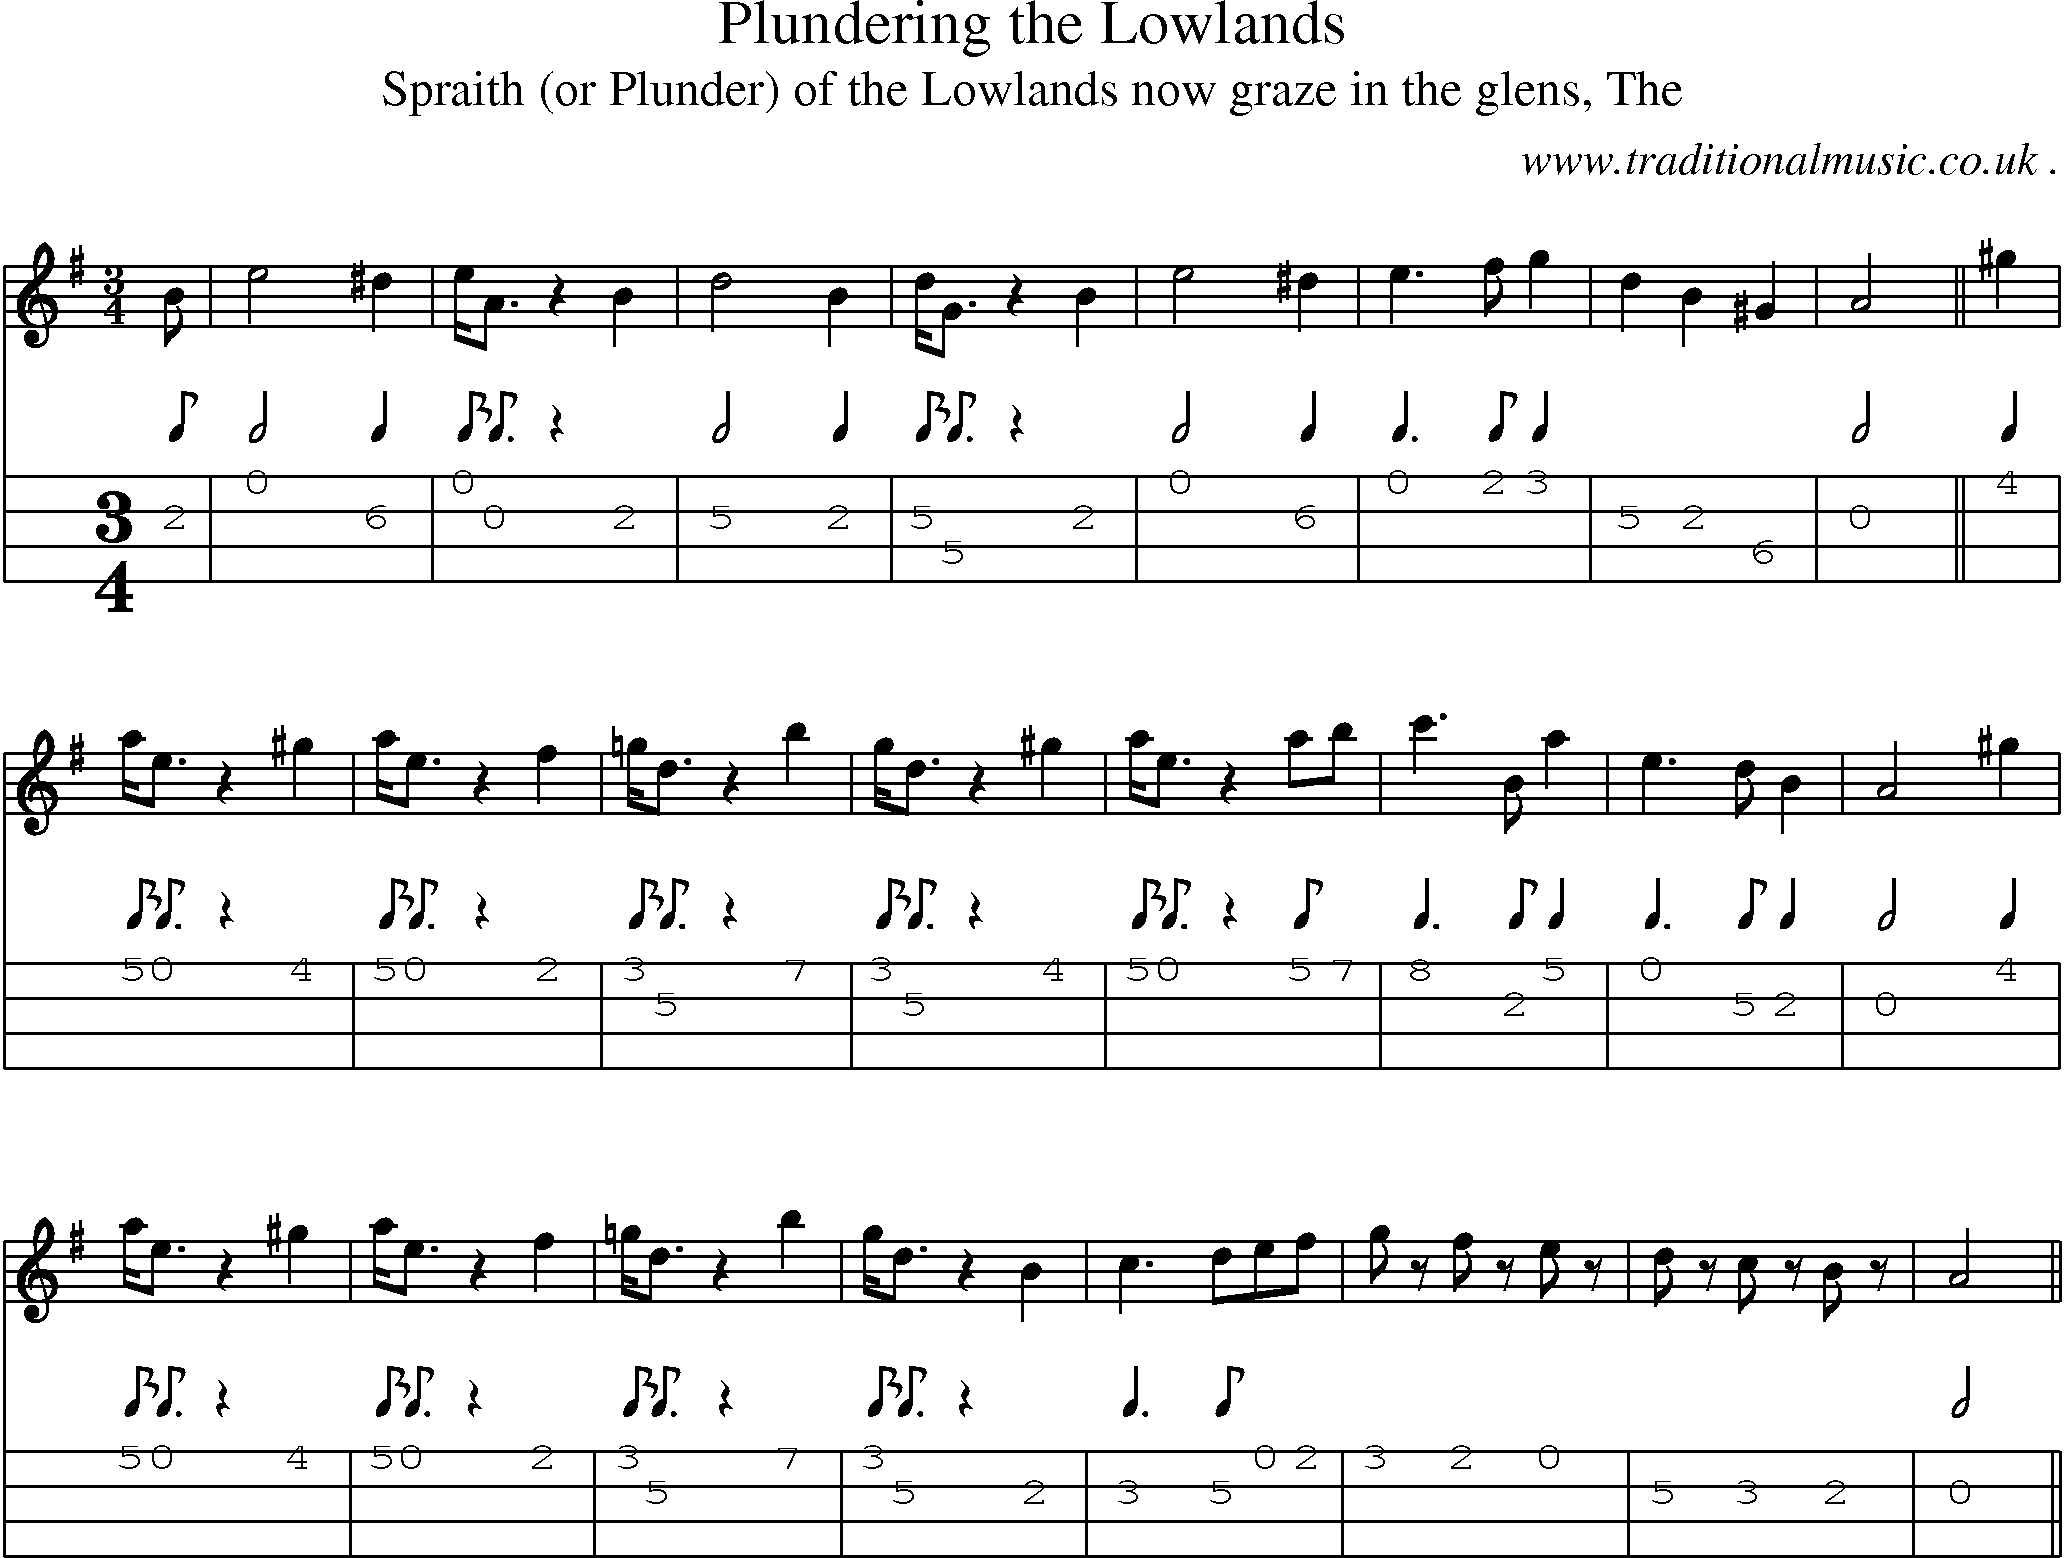 Sheet-music  score, Chords and Mandolin Tabs for Plundering The Lowlands